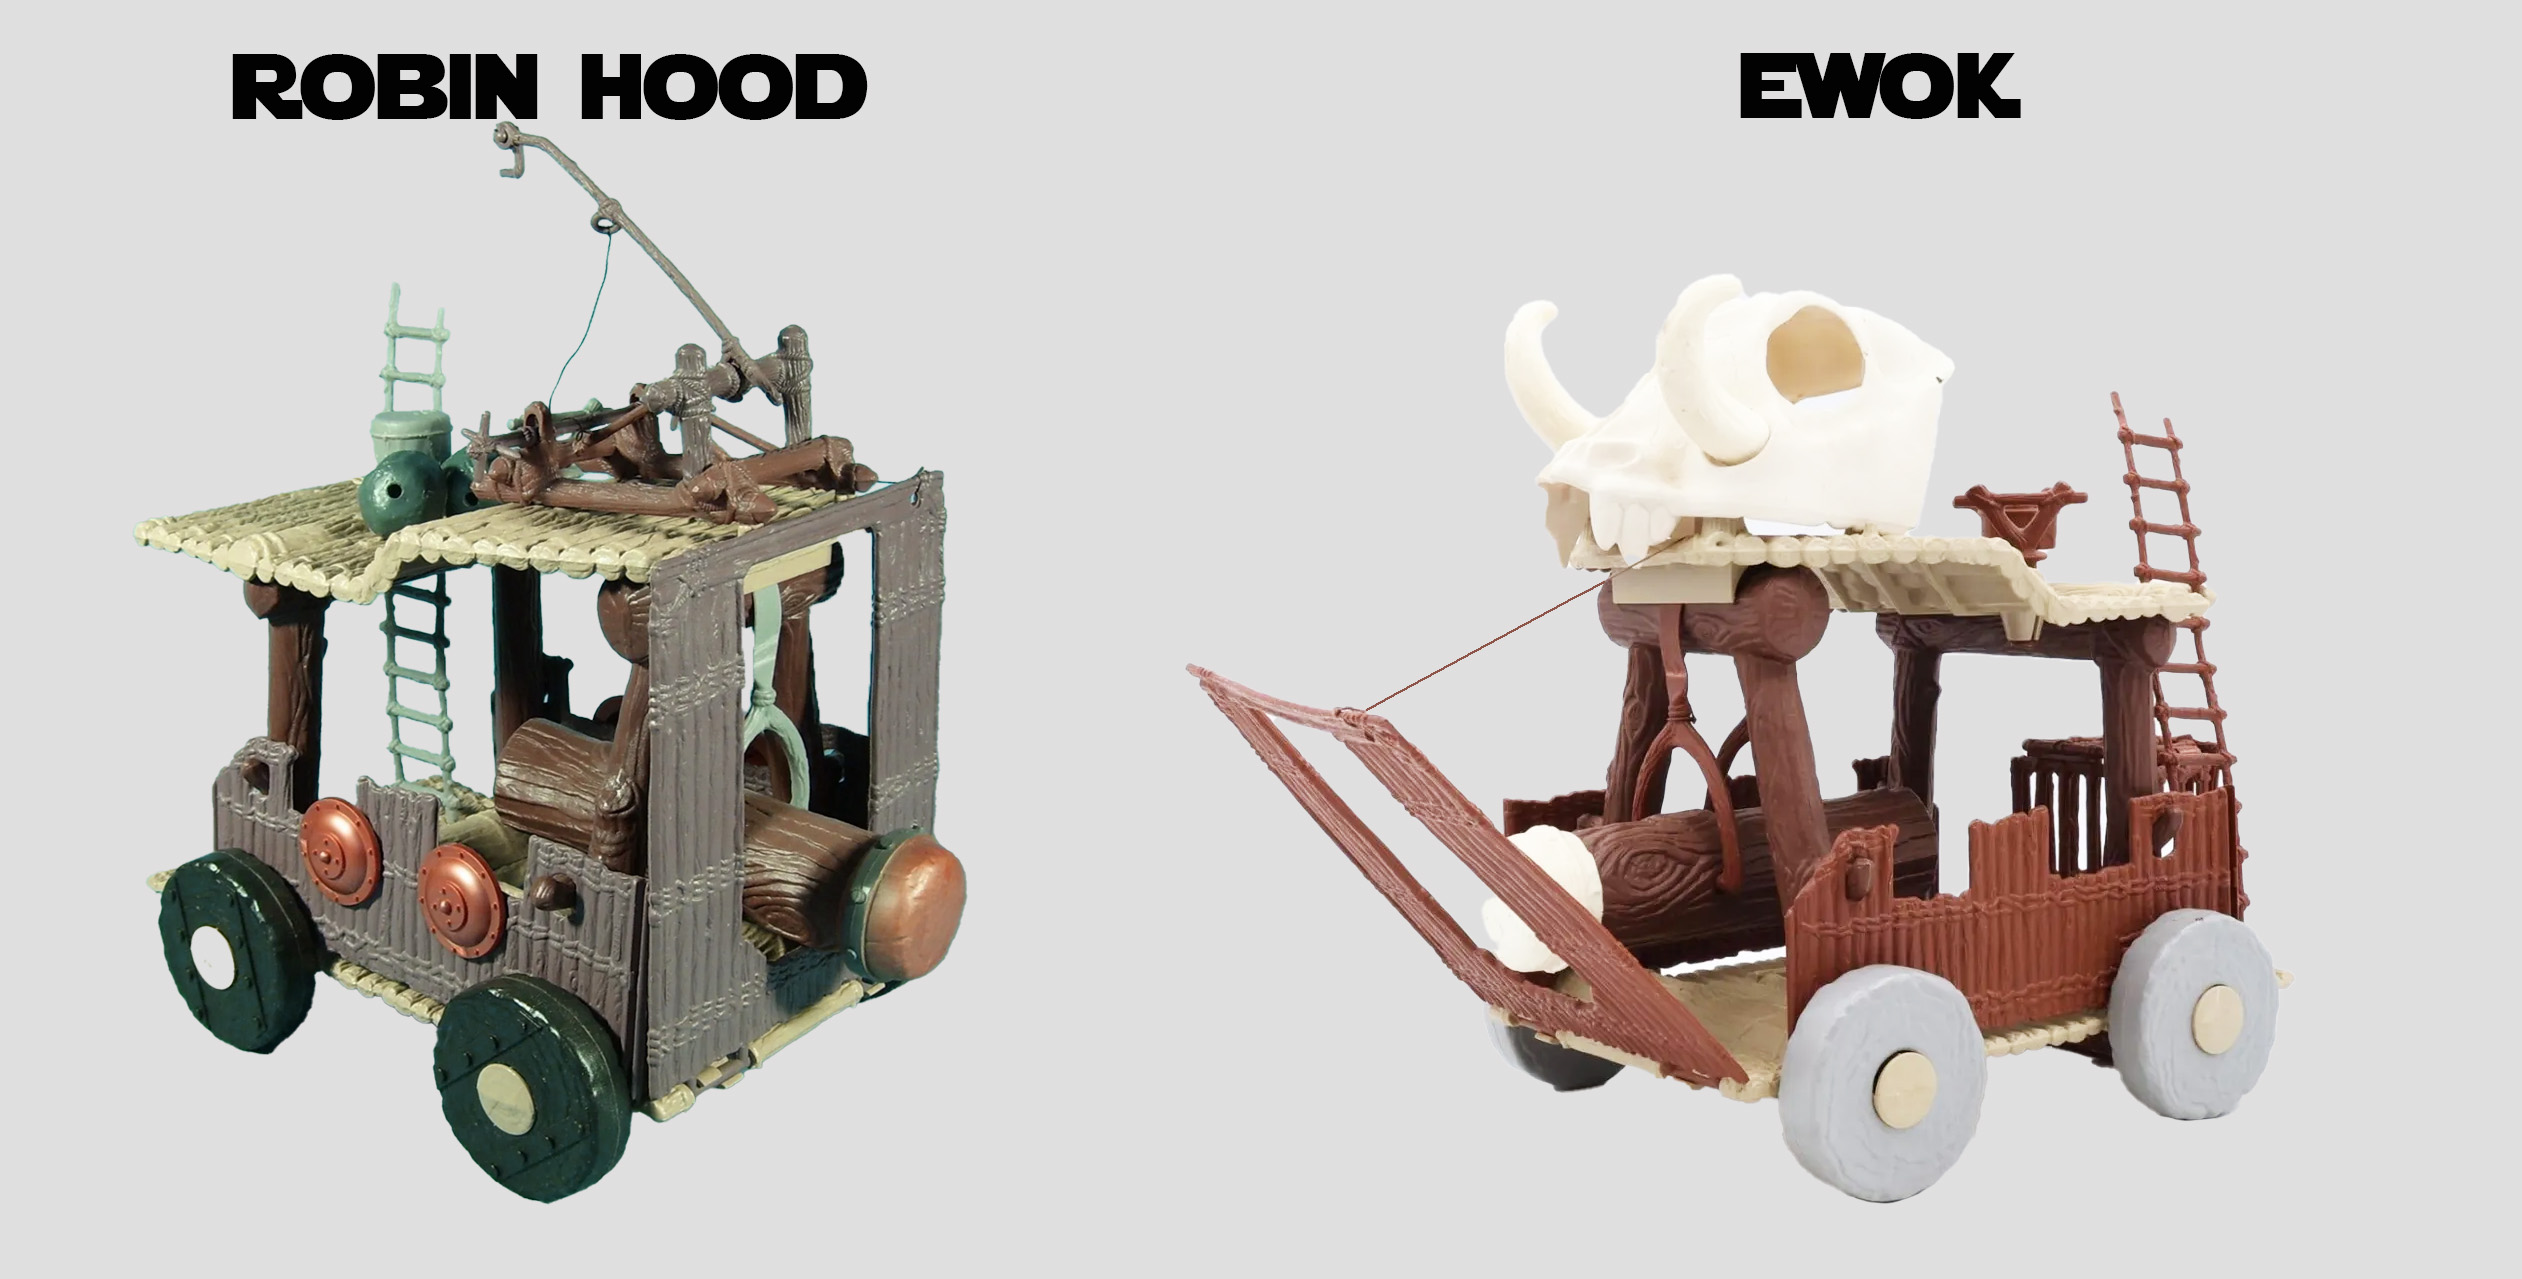 The differences between the vintage Star Wars Ewok Battle wagon and the Robin Hood version.